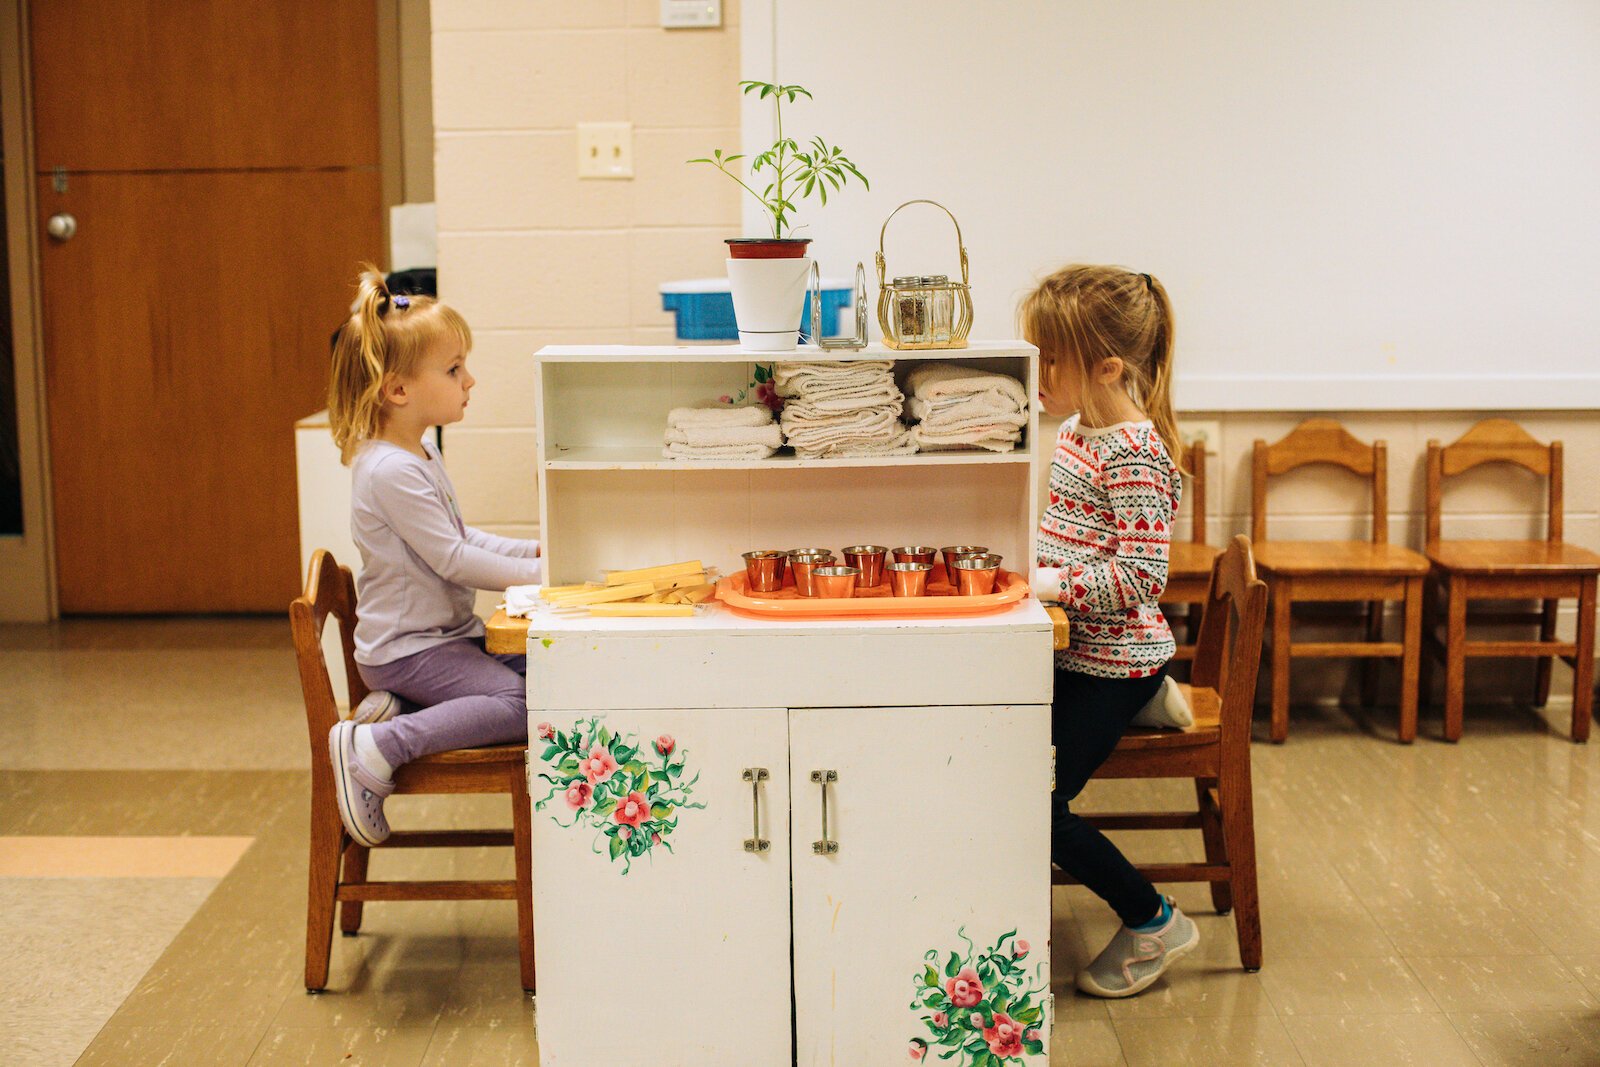 Montessori Education allows children to choose how to engage with the class environment, which is composed of purposefully designed activities.